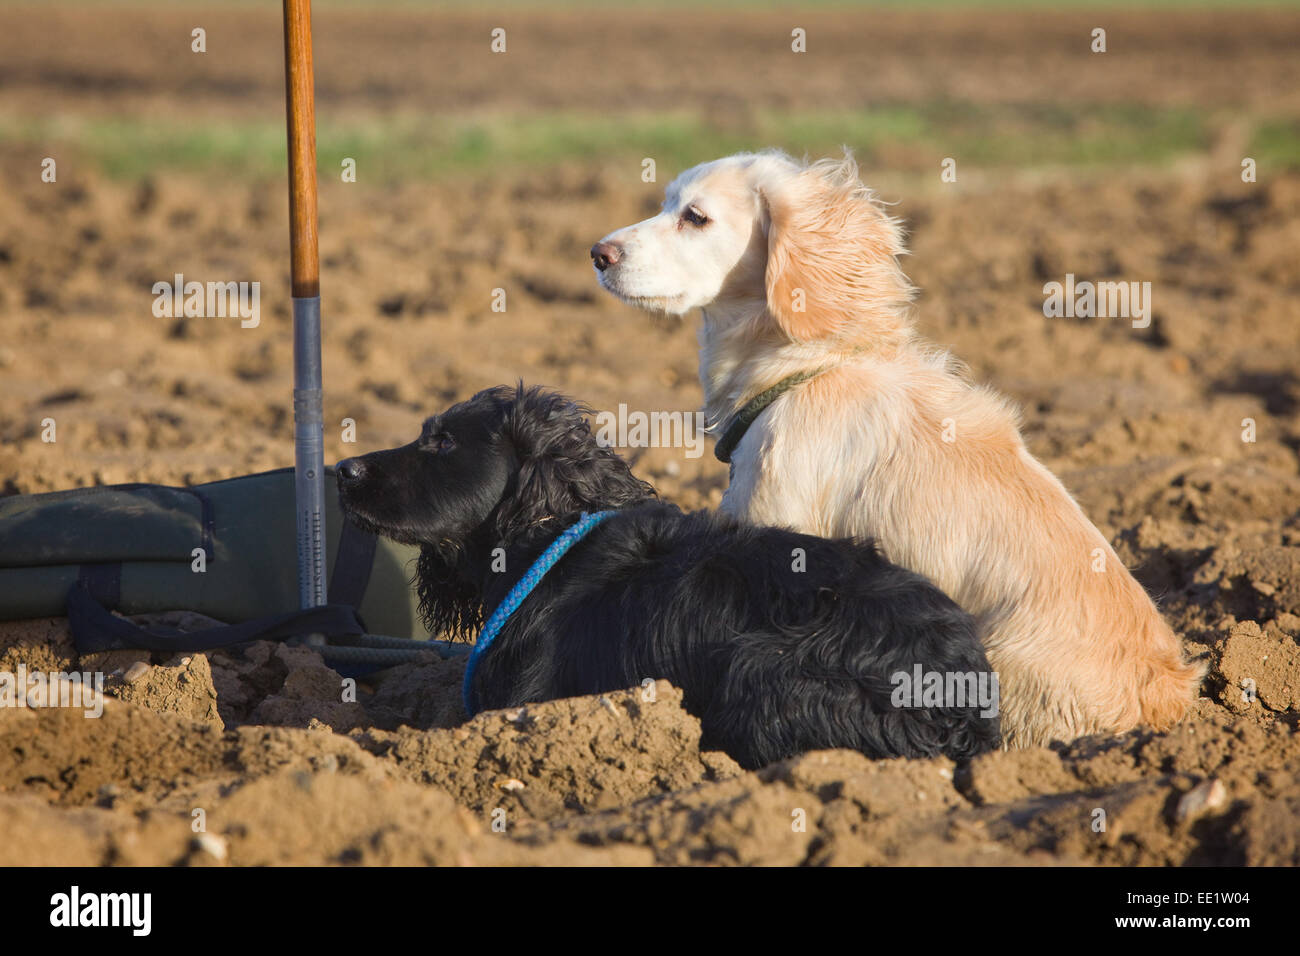 Two Cocker Spaniels on a field in the English countryside. Stock Photo